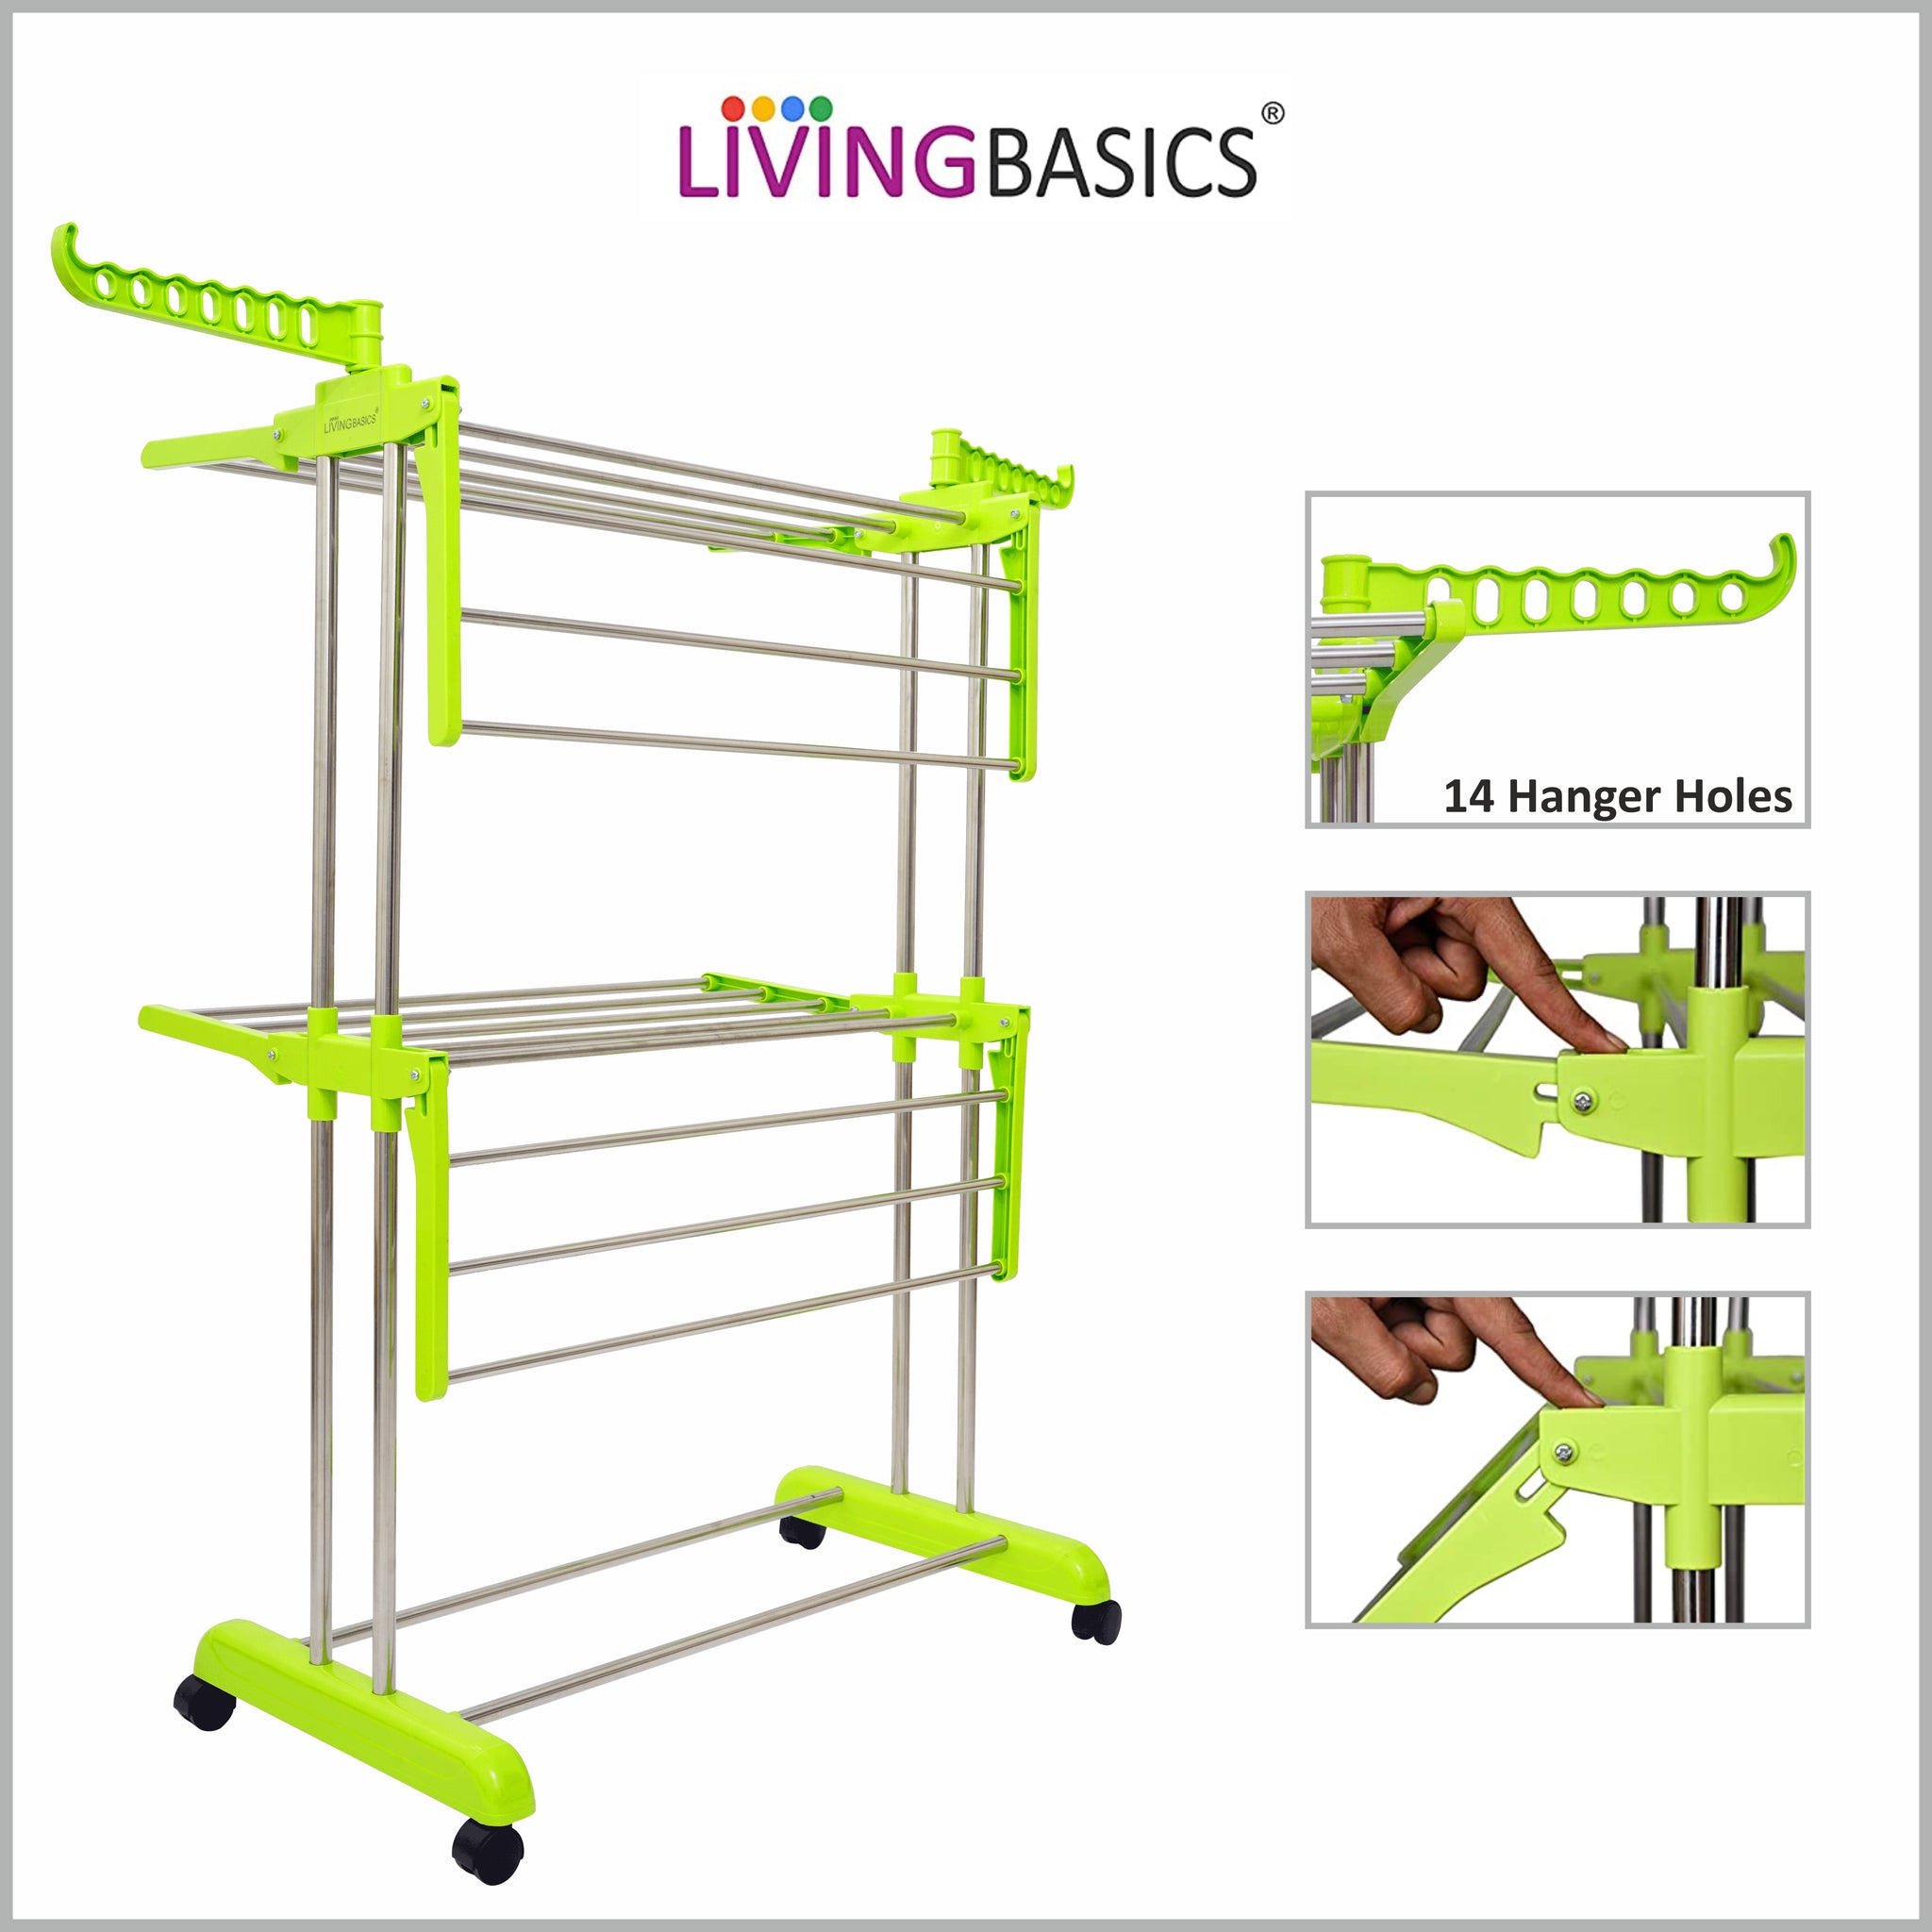 LIVINGBASICS Cloth Drying Stand Rust-Free Stainless Steel & ABS 2 Layer Foldable Clothes Dryer Rack / Folding Laundry Dry Stands with Wheels for Home / Indoor / Outdoor / Balcony (Lime Green)